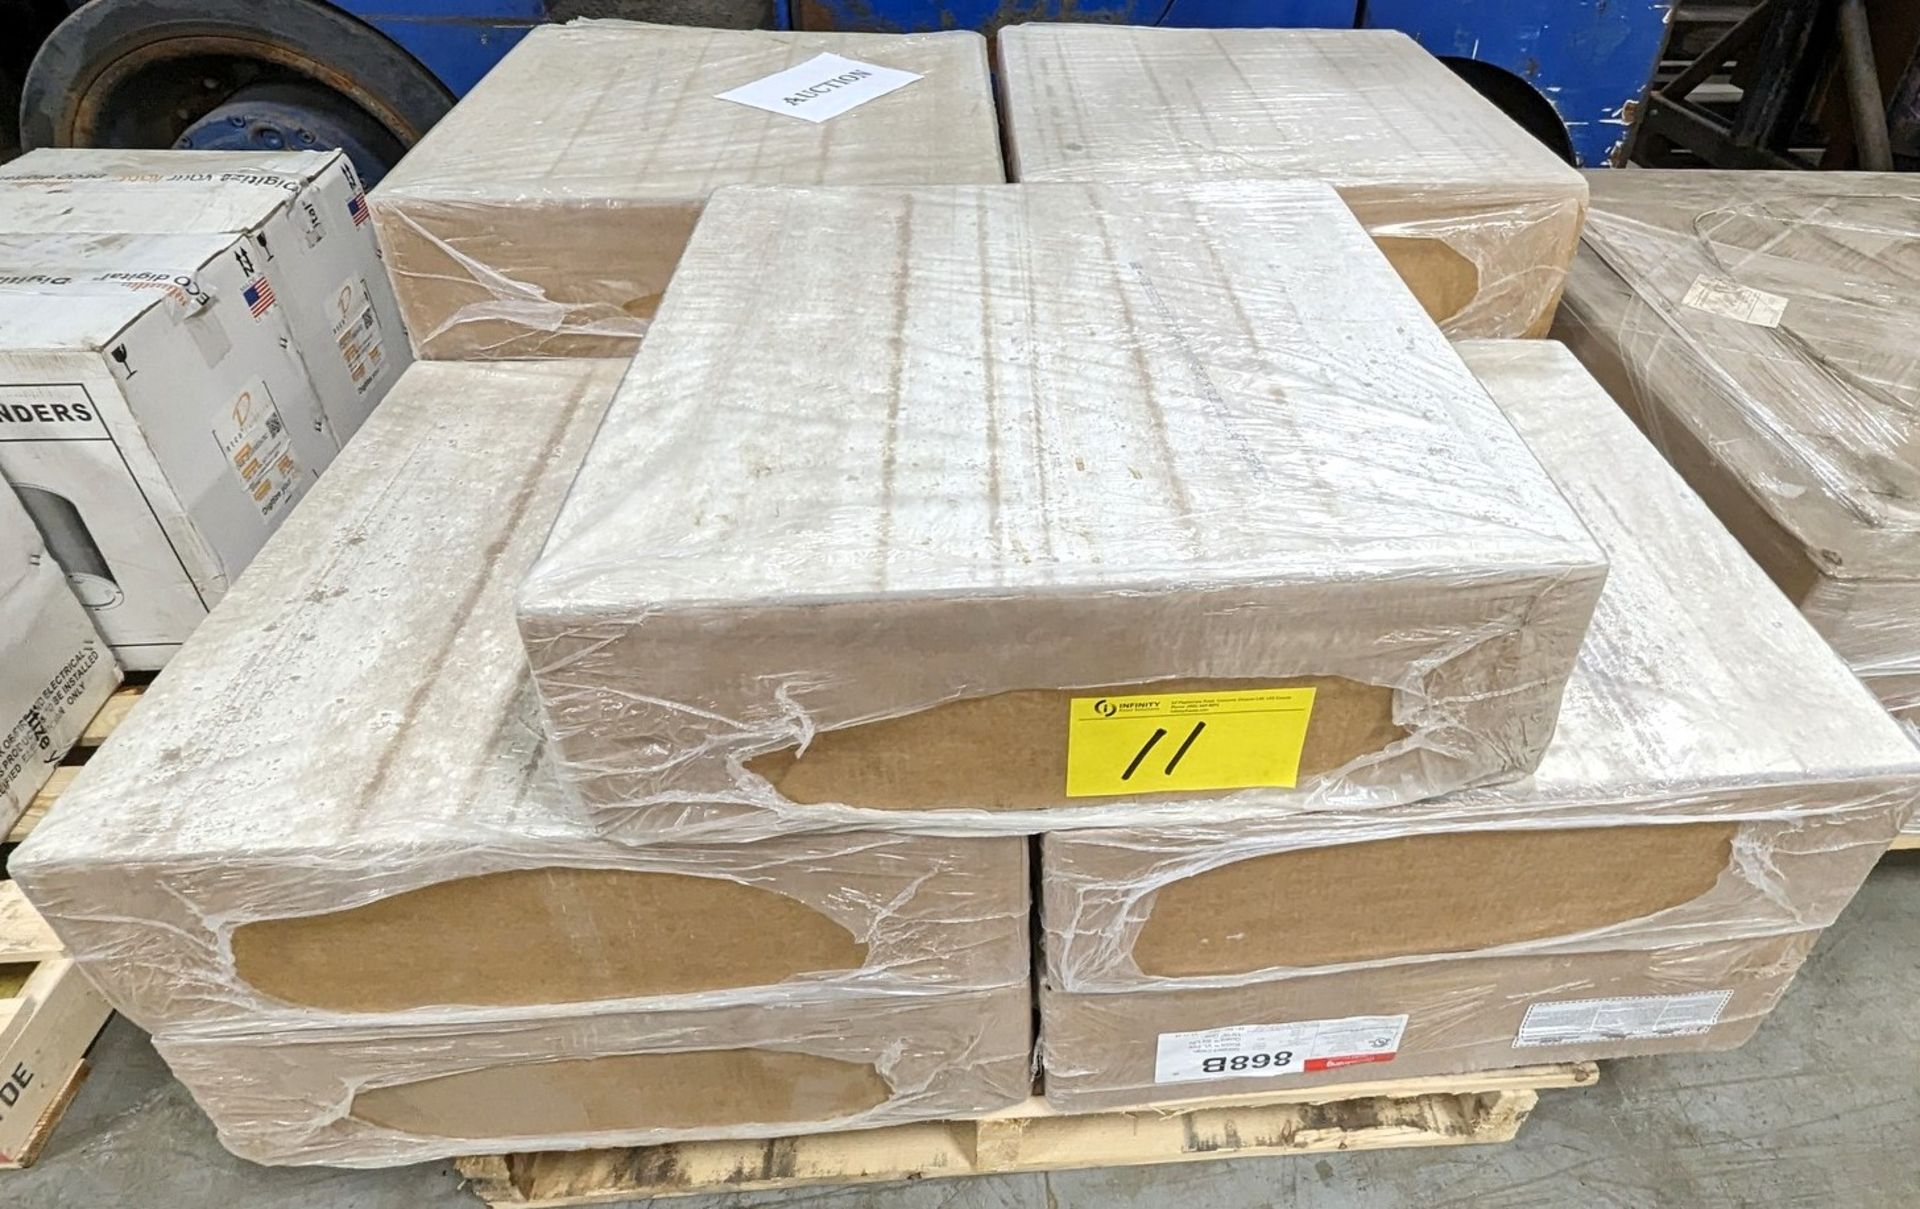 PALLET OF ARMSTRONG CEILING SOLUTIONS 868B ACOUSTIC CEILING TILES, ISSUE NO. BP-5852, R41/7 TYPE